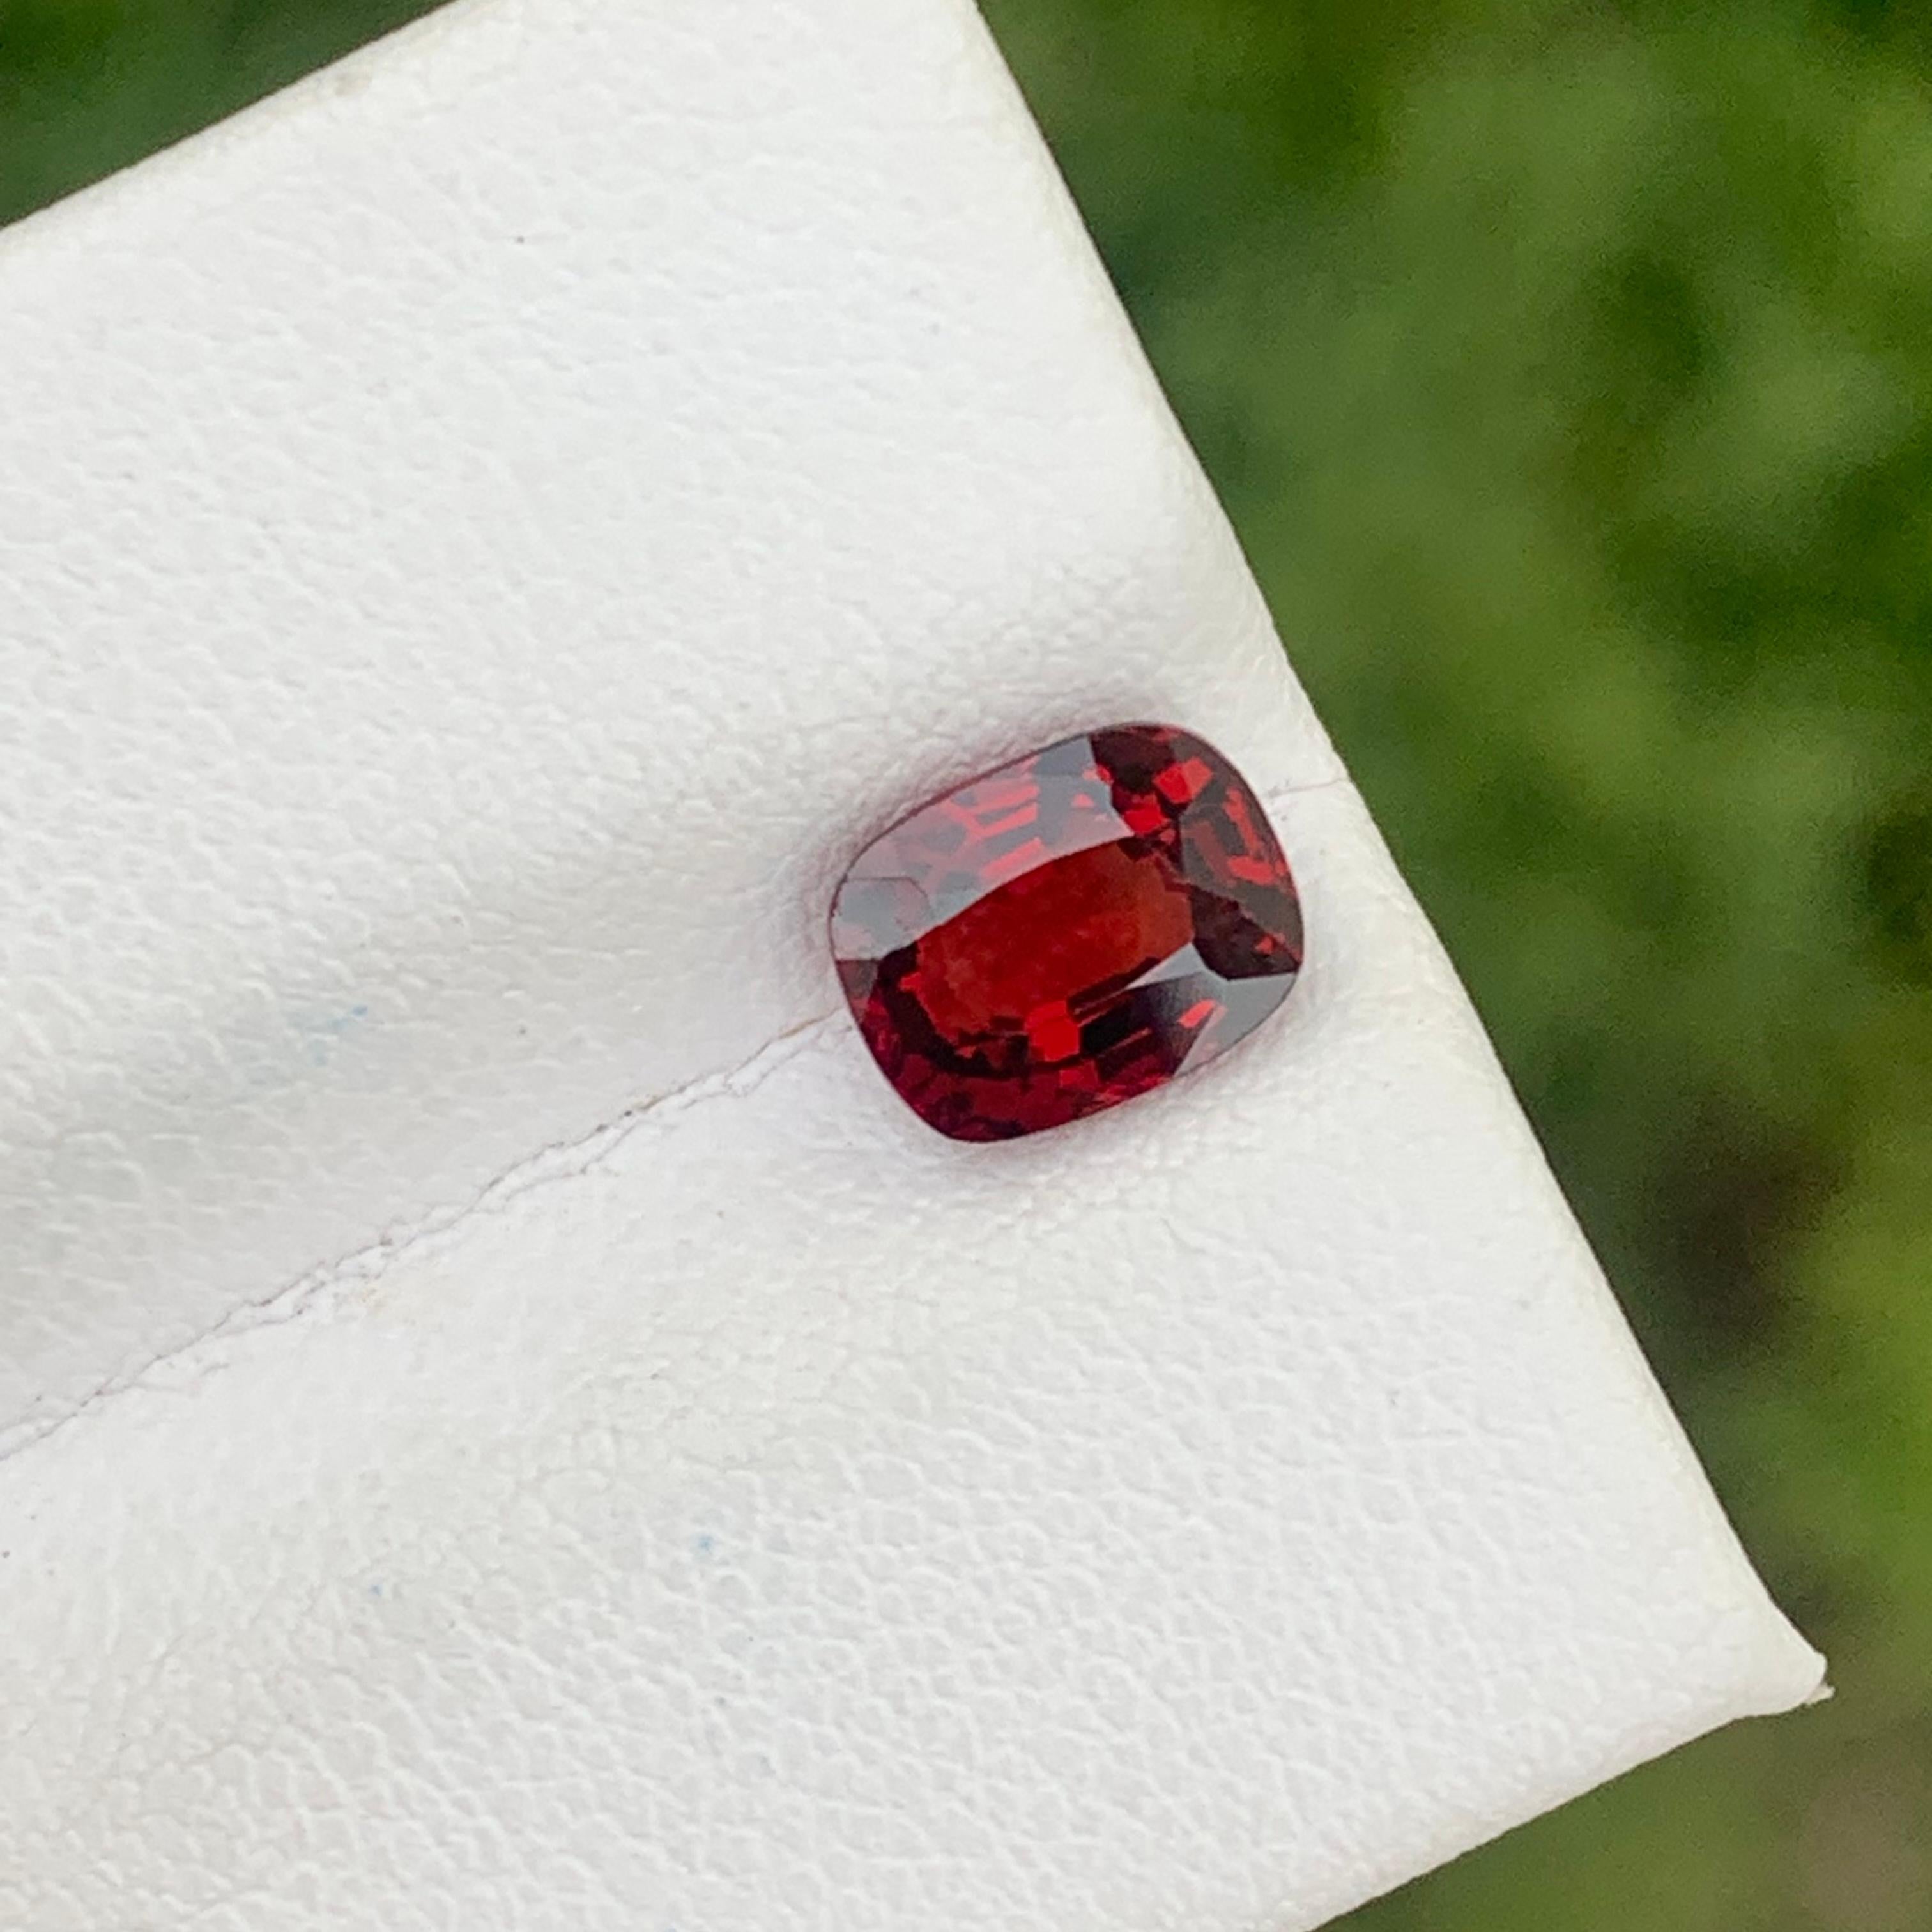 Cushion Cut Beautiful 1.45 Carat Natural Loose Red Spinel From Burma Myanmar Cushion Shape For Sale